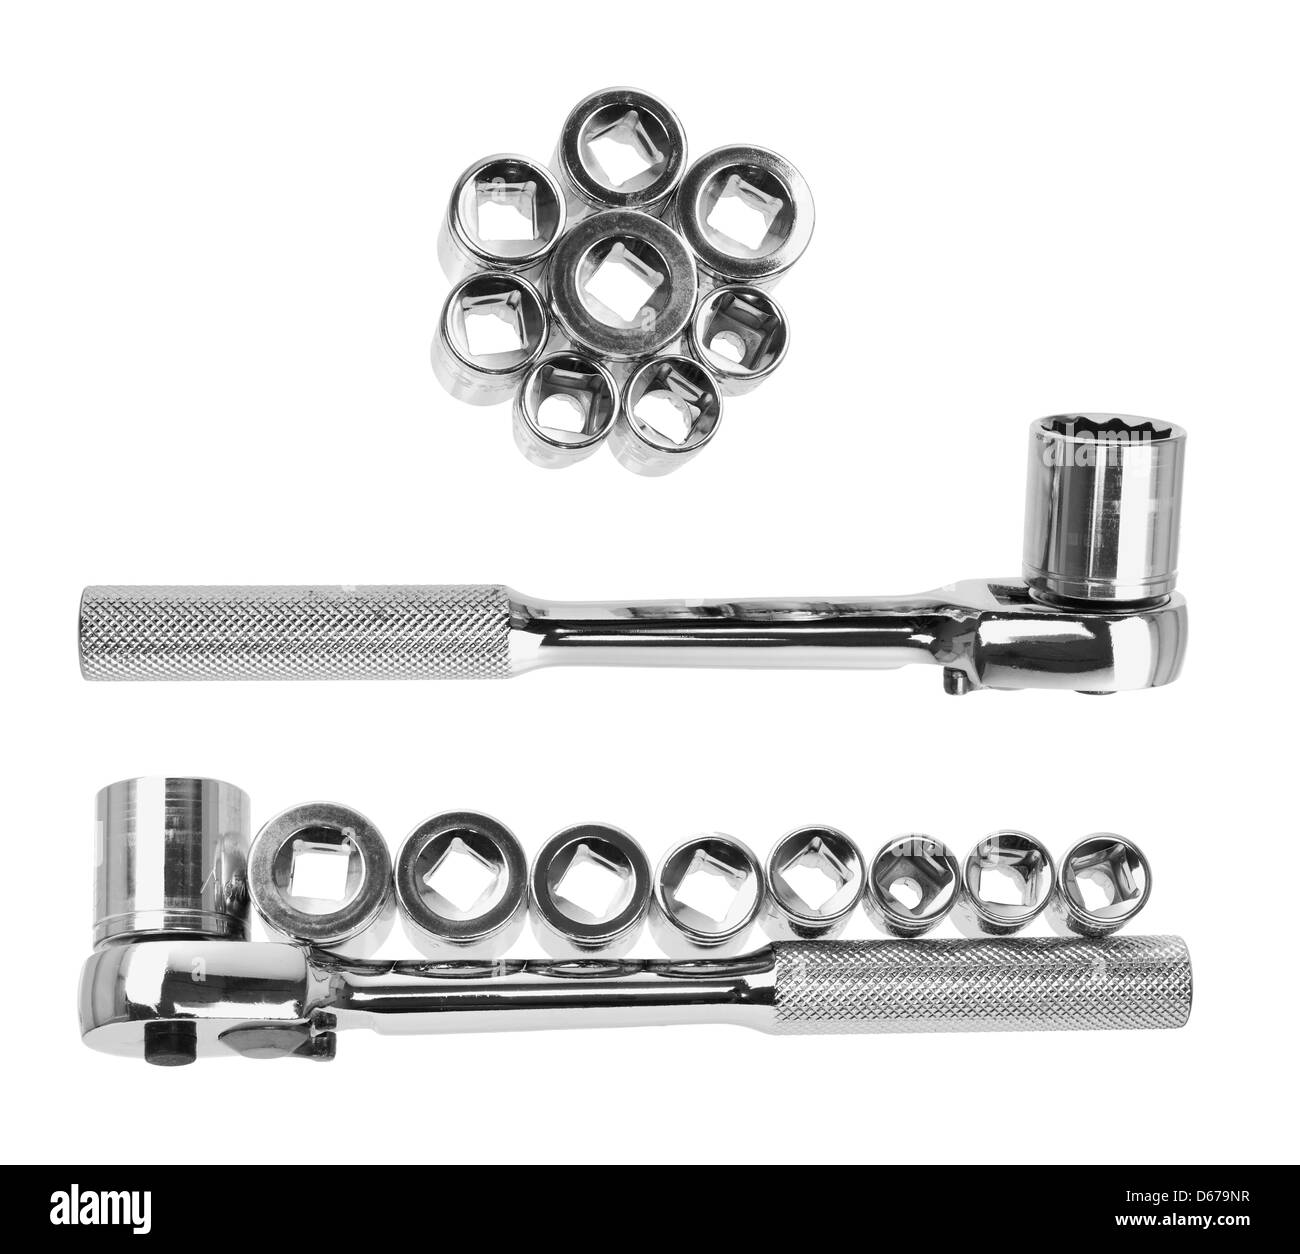 Socket Spanner Wrenches and Nuts Stock Photo